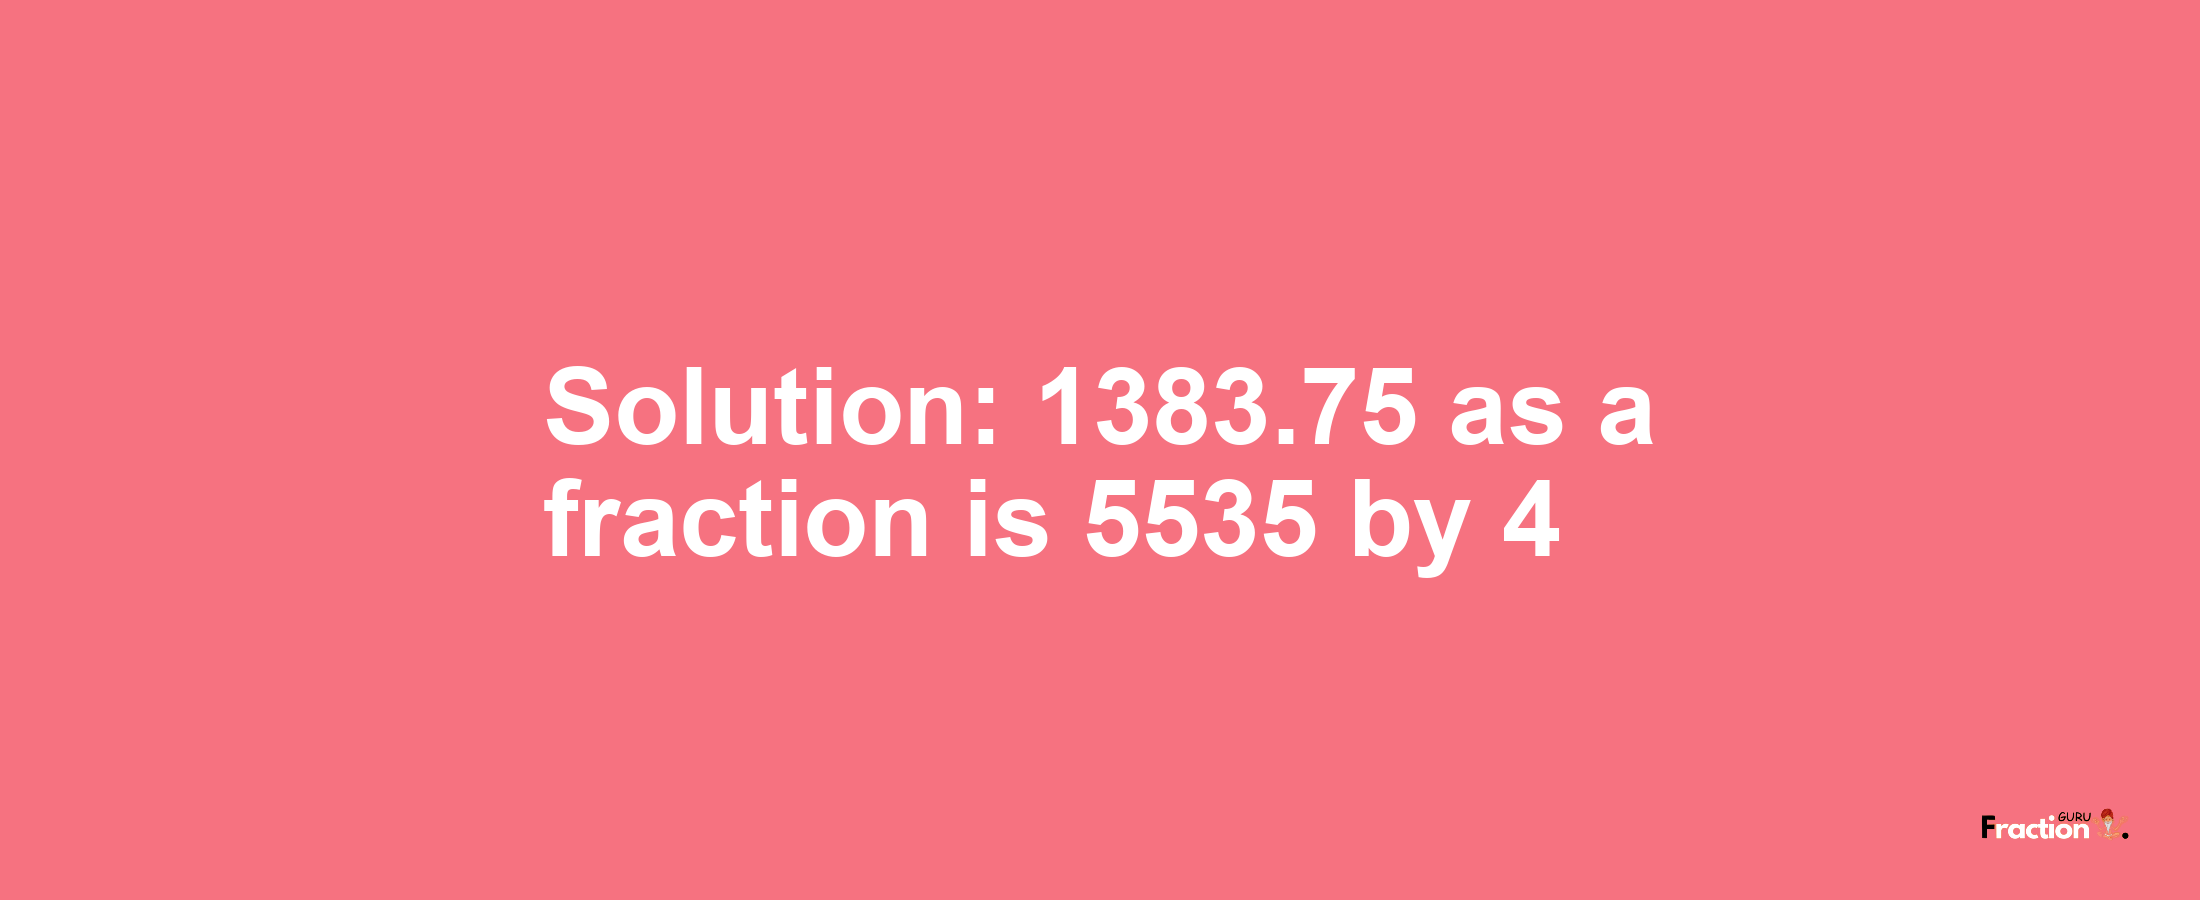 Solution:1383.75 as a fraction is 5535/4